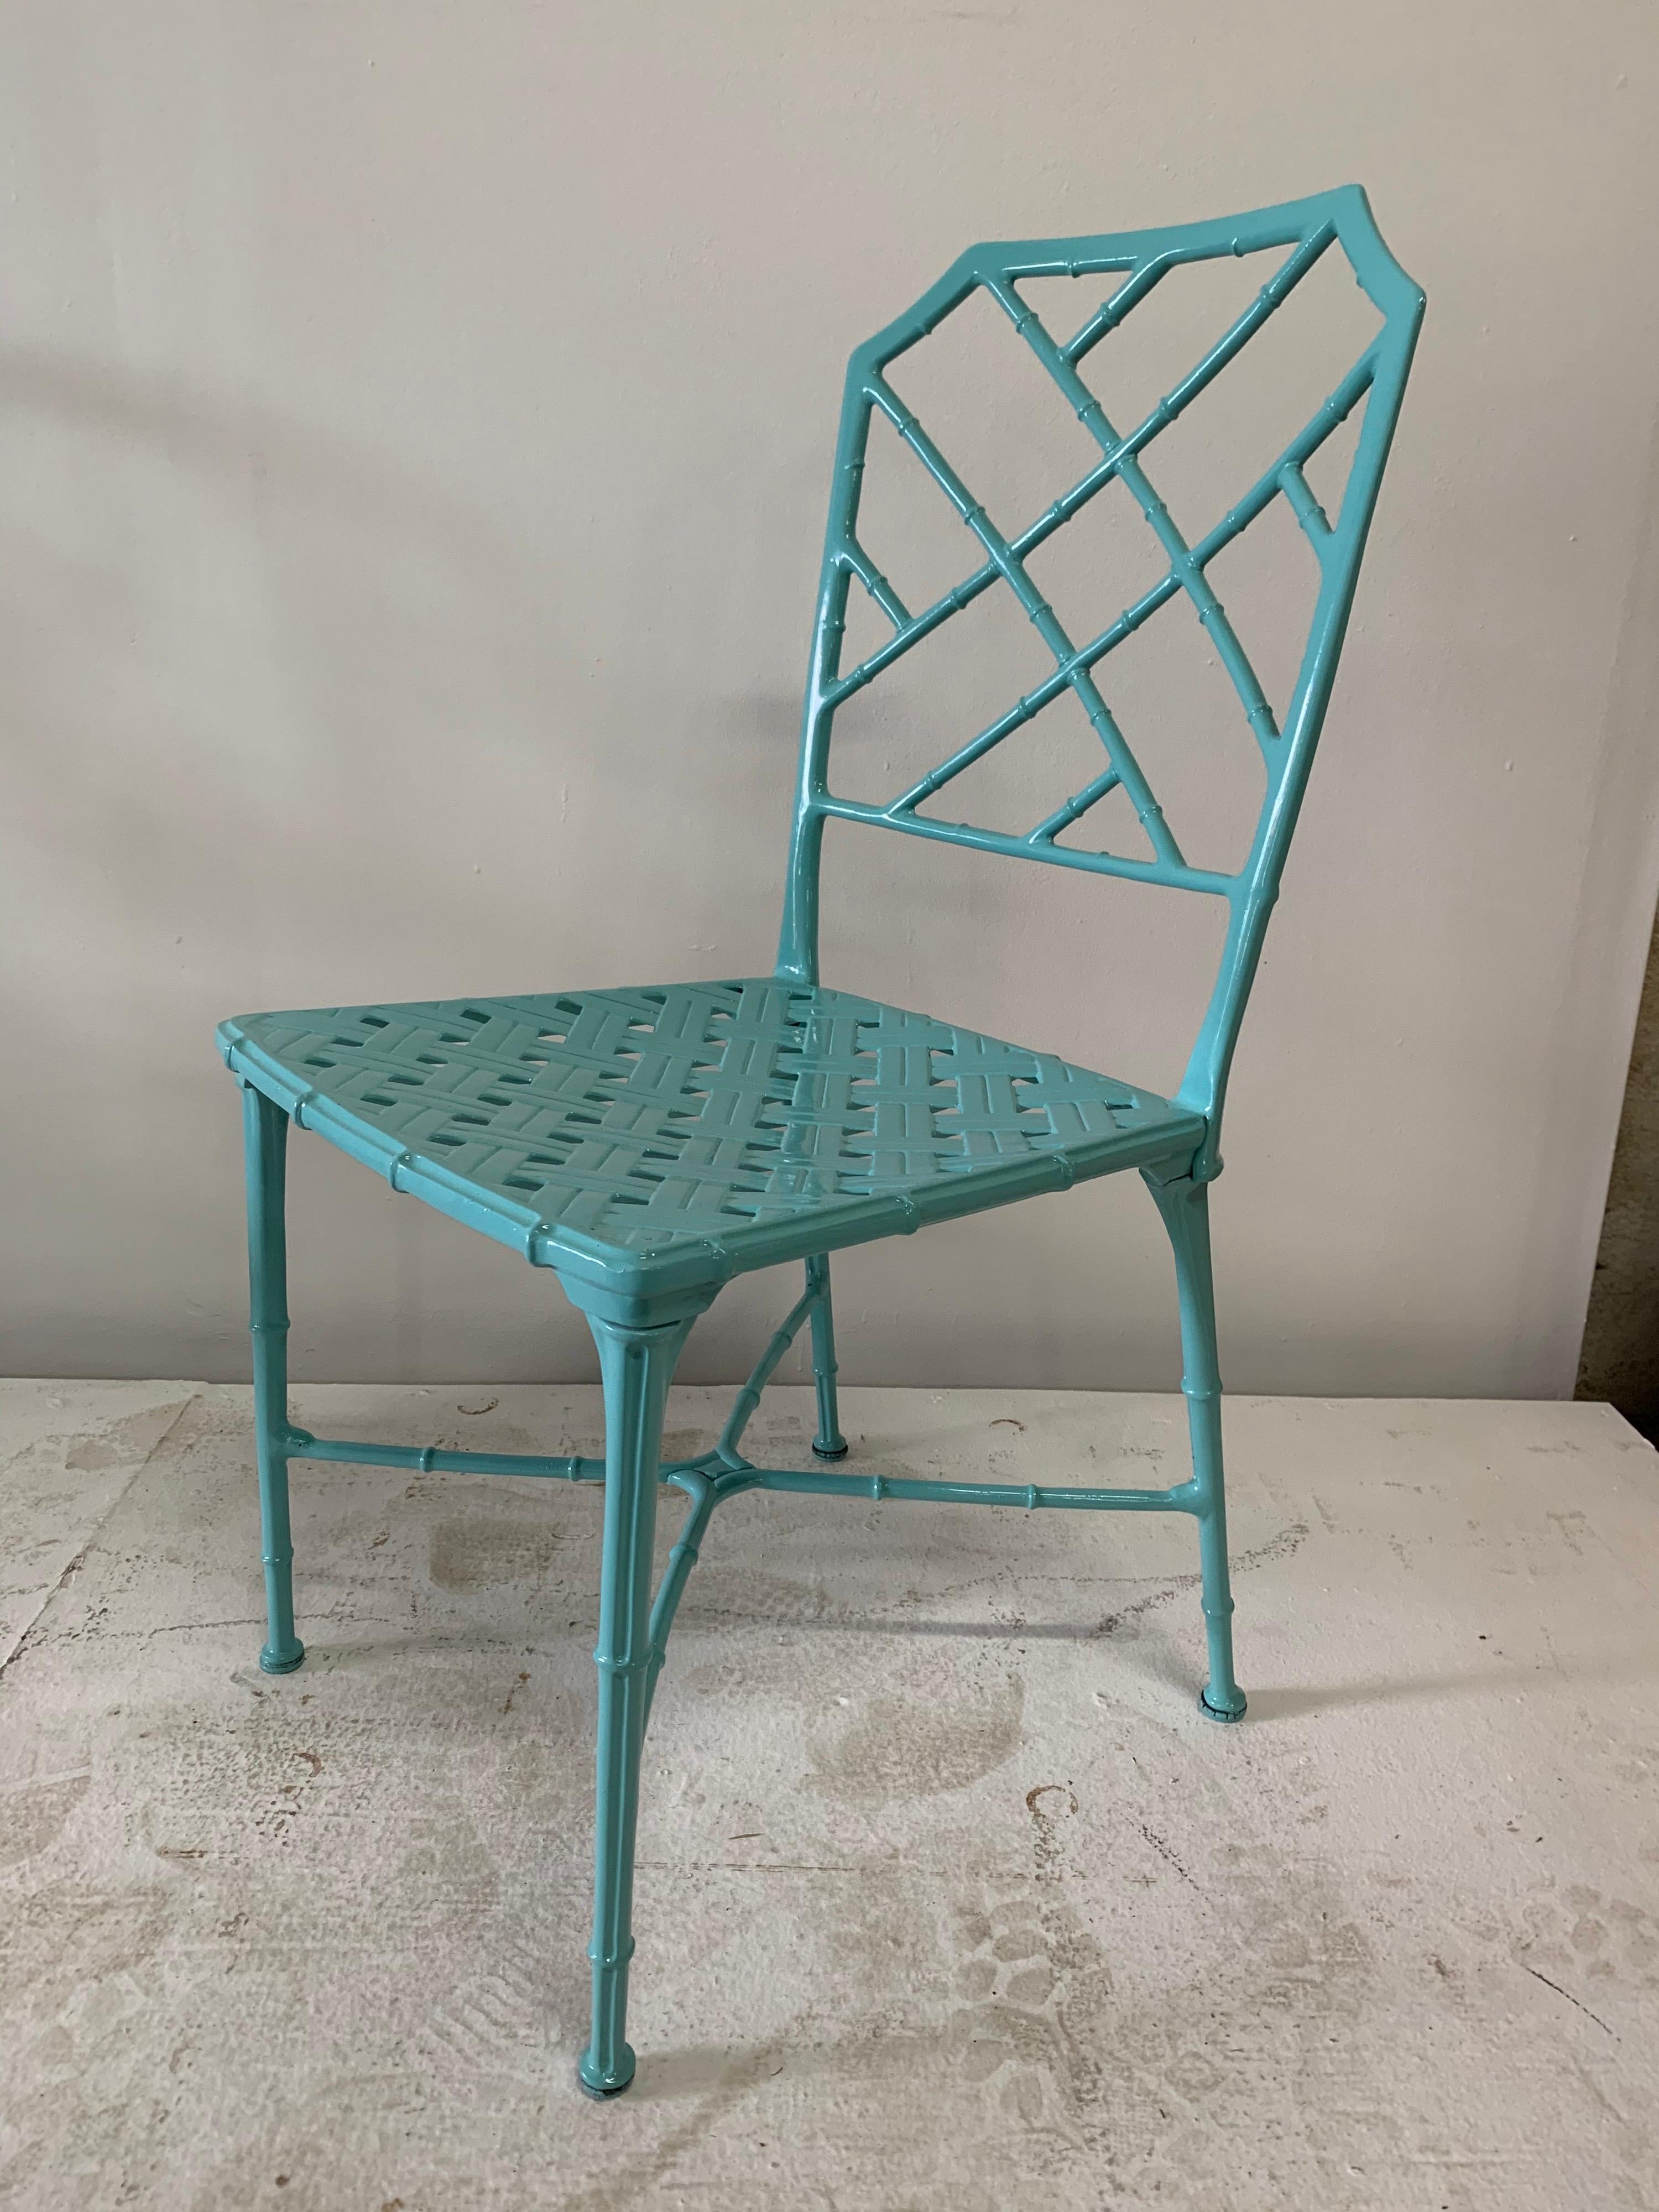 Classic set of Chinese Chippendale faux bamboo dining chairs for outdoor, garden, or patio with 3 armchairs and 3 armless chairs. Recently powder coated in tiffany blue over cast aluminum. Designed by Hall Bradley for Brown Jordan, 1967. Dimensions: